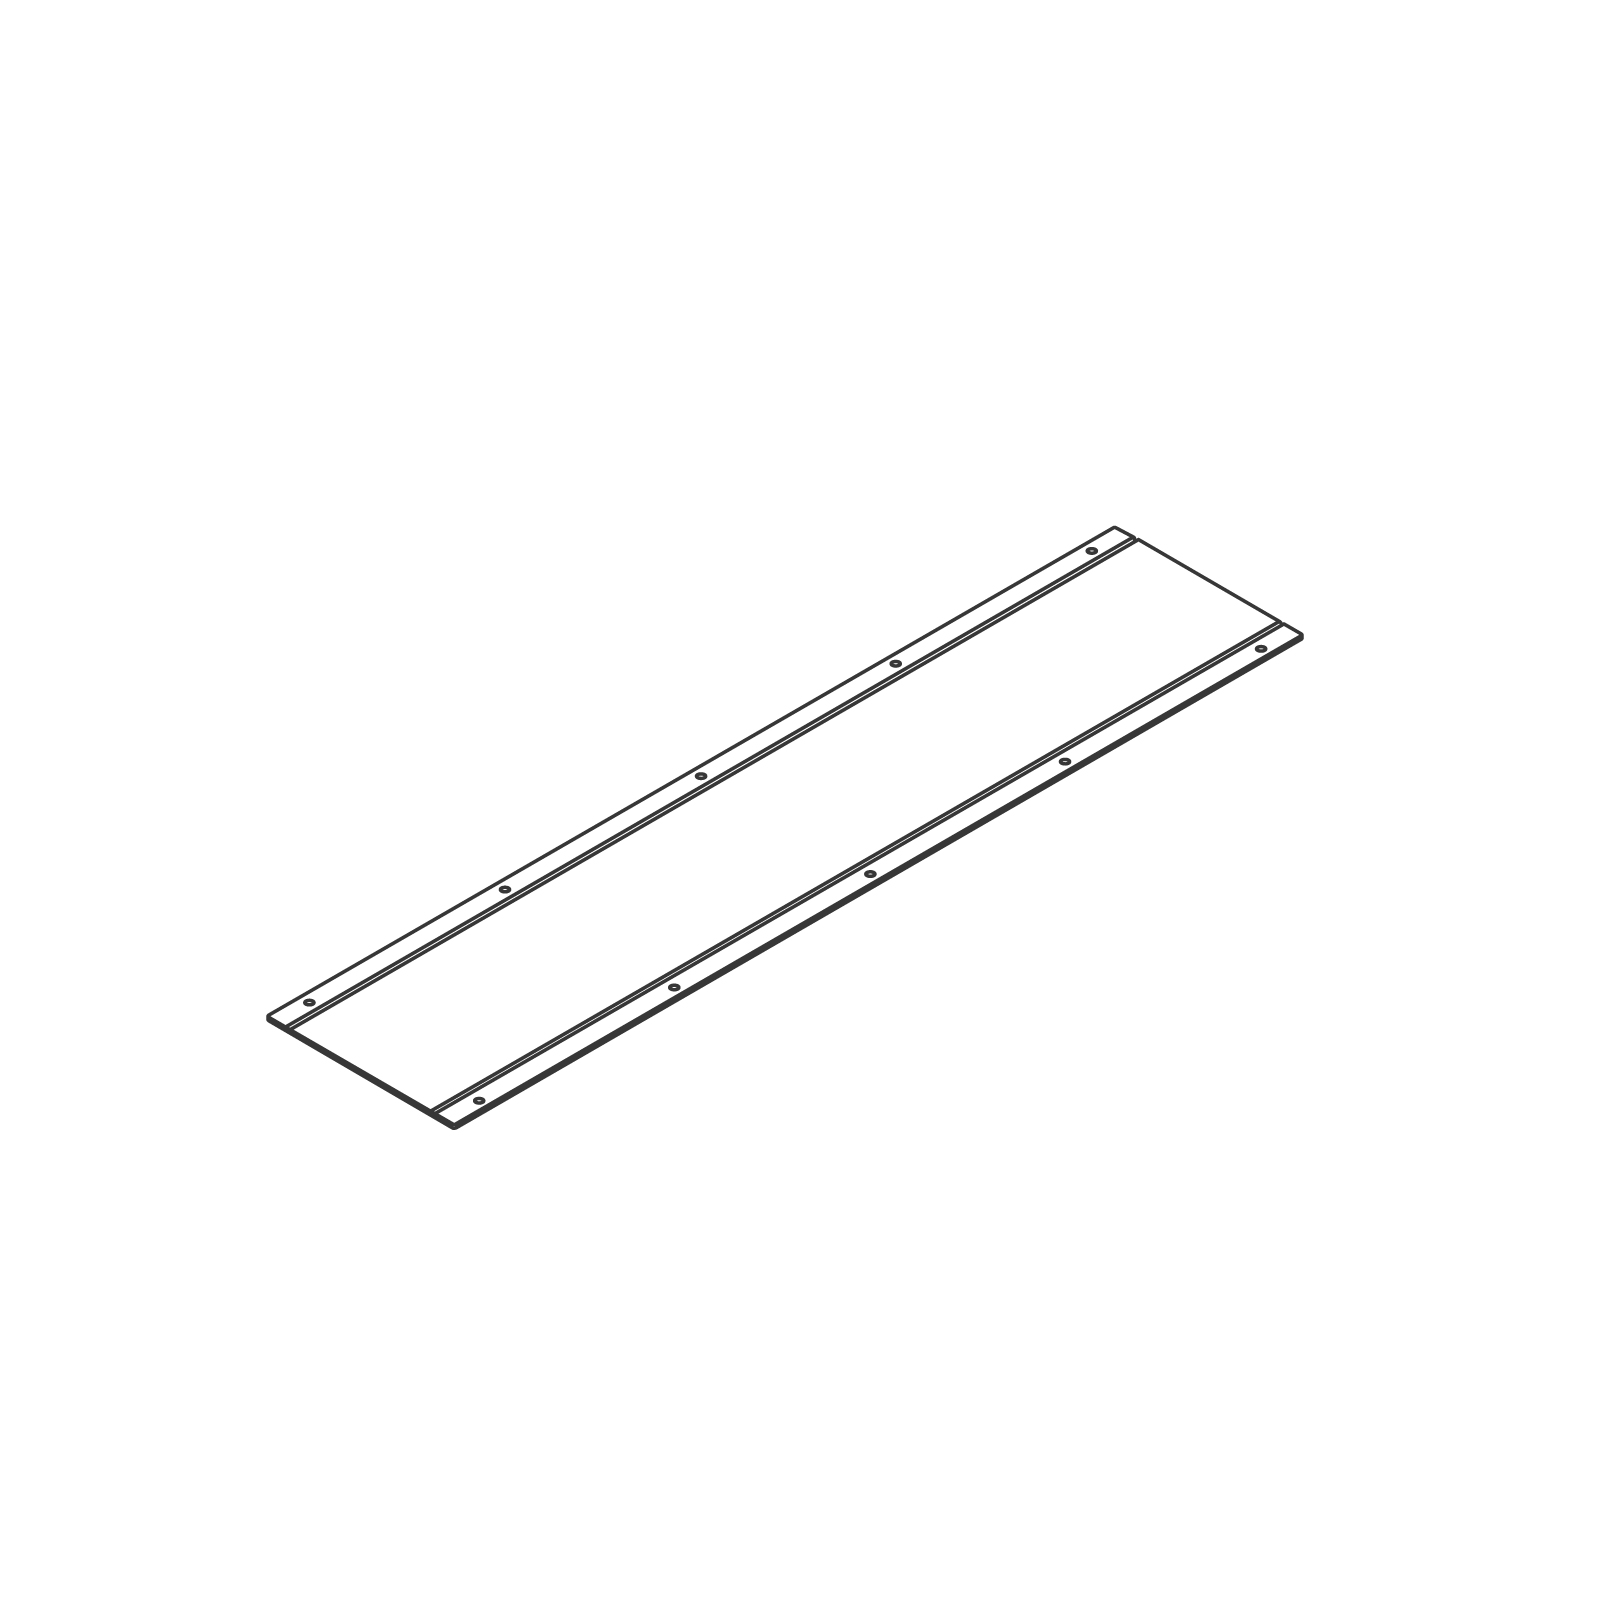 A line drawing - OE1 Agile Wall–Corner Cover